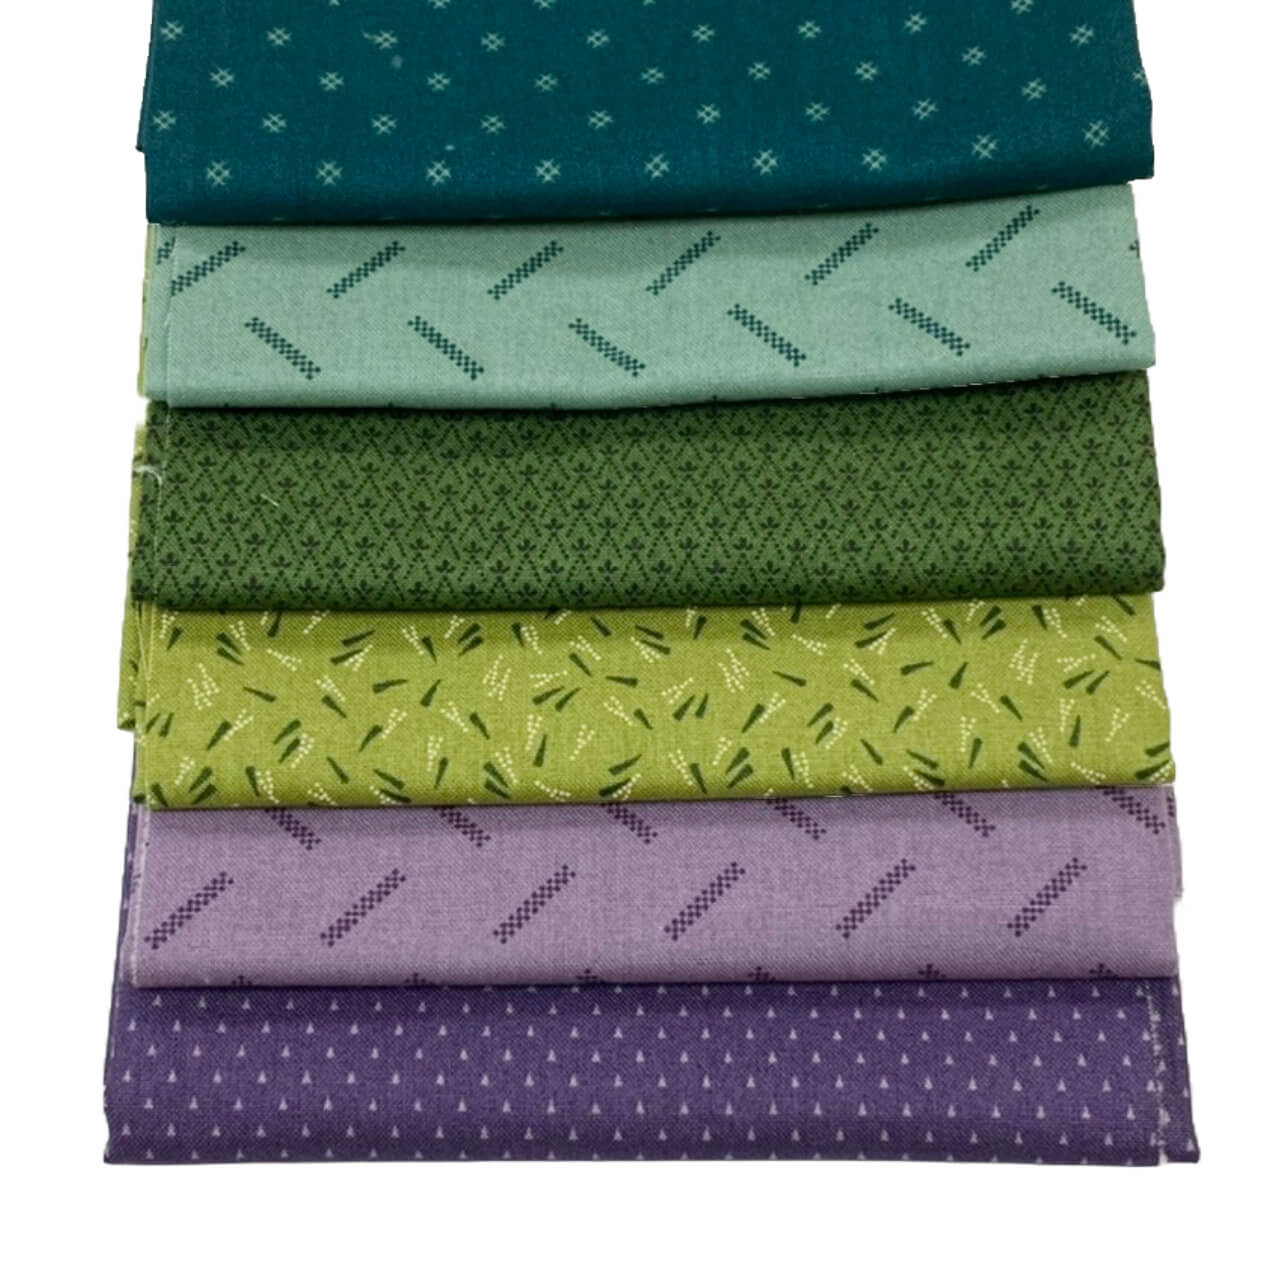 A stack of five Andover Jewelbox Spring fat quarters, showcasing an array of ditsy prints in shades of teal, mint green, olive, lime, and lavender.